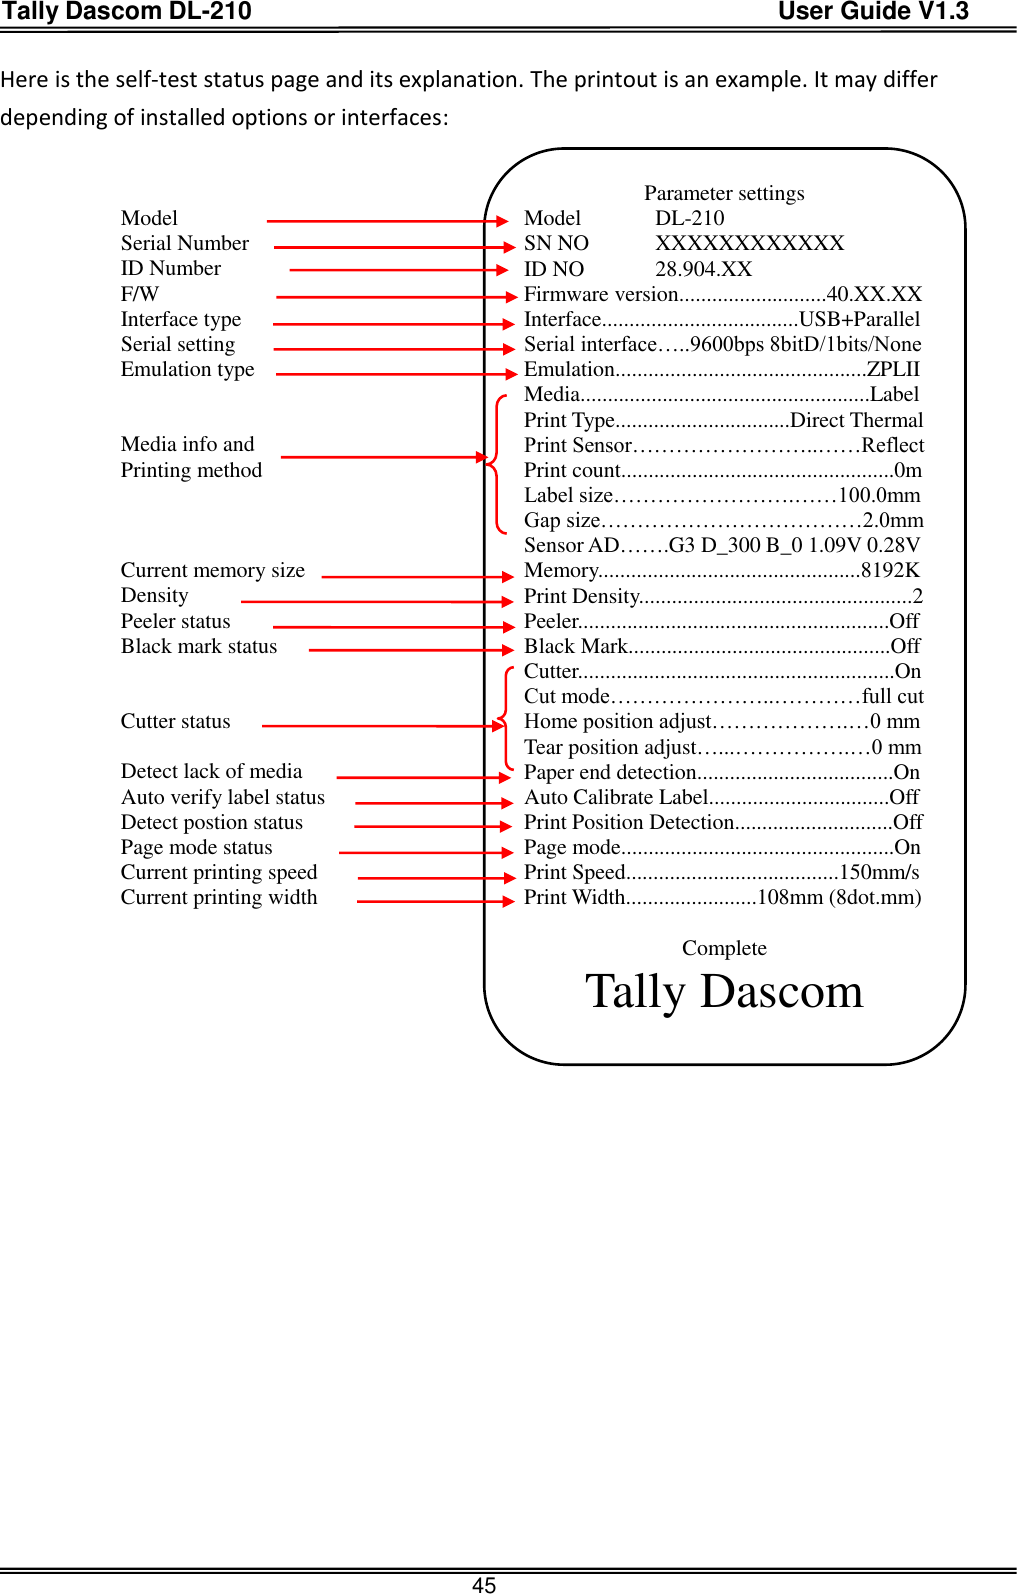 Tally Dascom DL-210                                          User Guide V1.3  45 Here is the self-test status page and its explanation. The printout is an example. It may differ depending of installed options or interfaces:                    Model Serial Number ID Number F/W   Interface type Serial setting Emulation type   Media info and   Printing method    Current memory size Density Peeler status Black mark status   Cutter status  Detect lack of media Auto verify label status Detect postion status Page mode status Current printing speed Current printing width   Parameter settings Model    DL-210 SN NO    XXXXXXXXXXXX ID NO    28.904.XX   Firmware version...........................40.XX.XX Interface....................................USB+Parallel Serial interface…..9600bps 8bitD/1bits/None Emulation..............................................ZPLII Media.....................................................Label Print Type................................Direct Thermal Print Sensor……………………..……Reflect Print count..................................................0m Label size…………………….……100.0mm Gap size………………………………2.0mm Sensor AD…….G3 D_300 B_0 1.09V 0.28V Memory................................................8192K Print Density..................................................2 Peeler.........................................................Off Black Mark................................................Off Cutter..........................................................On Cut mode…………………..…………full cut Home position adjust……………….…0 mm Tear position adjust…...…………….…0 mm Paper end detection....................................On Auto Calibrate Label.................................Off Print Position Detection.............................Off Page mode..................................................On Print Speed.......................................150mm/s Print Width........................108mm (8dot.mm)  Complete Tally Dascom 